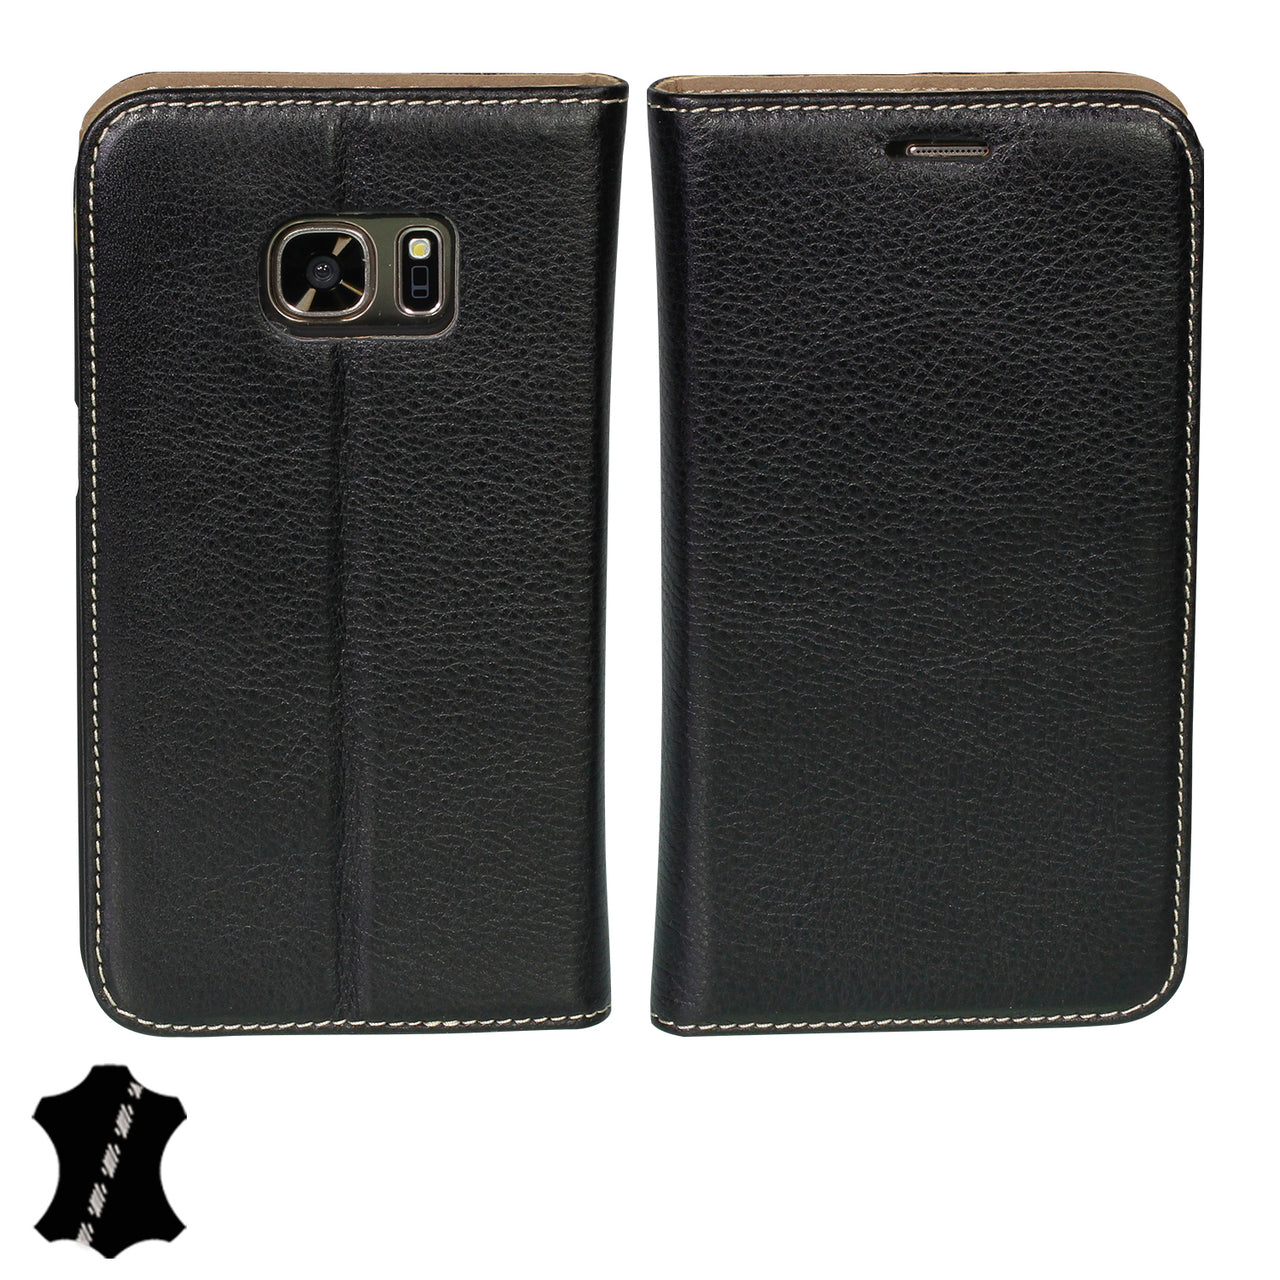 Samsung Galaxy S7 Genuine Leather Case with Stand | Artisancover